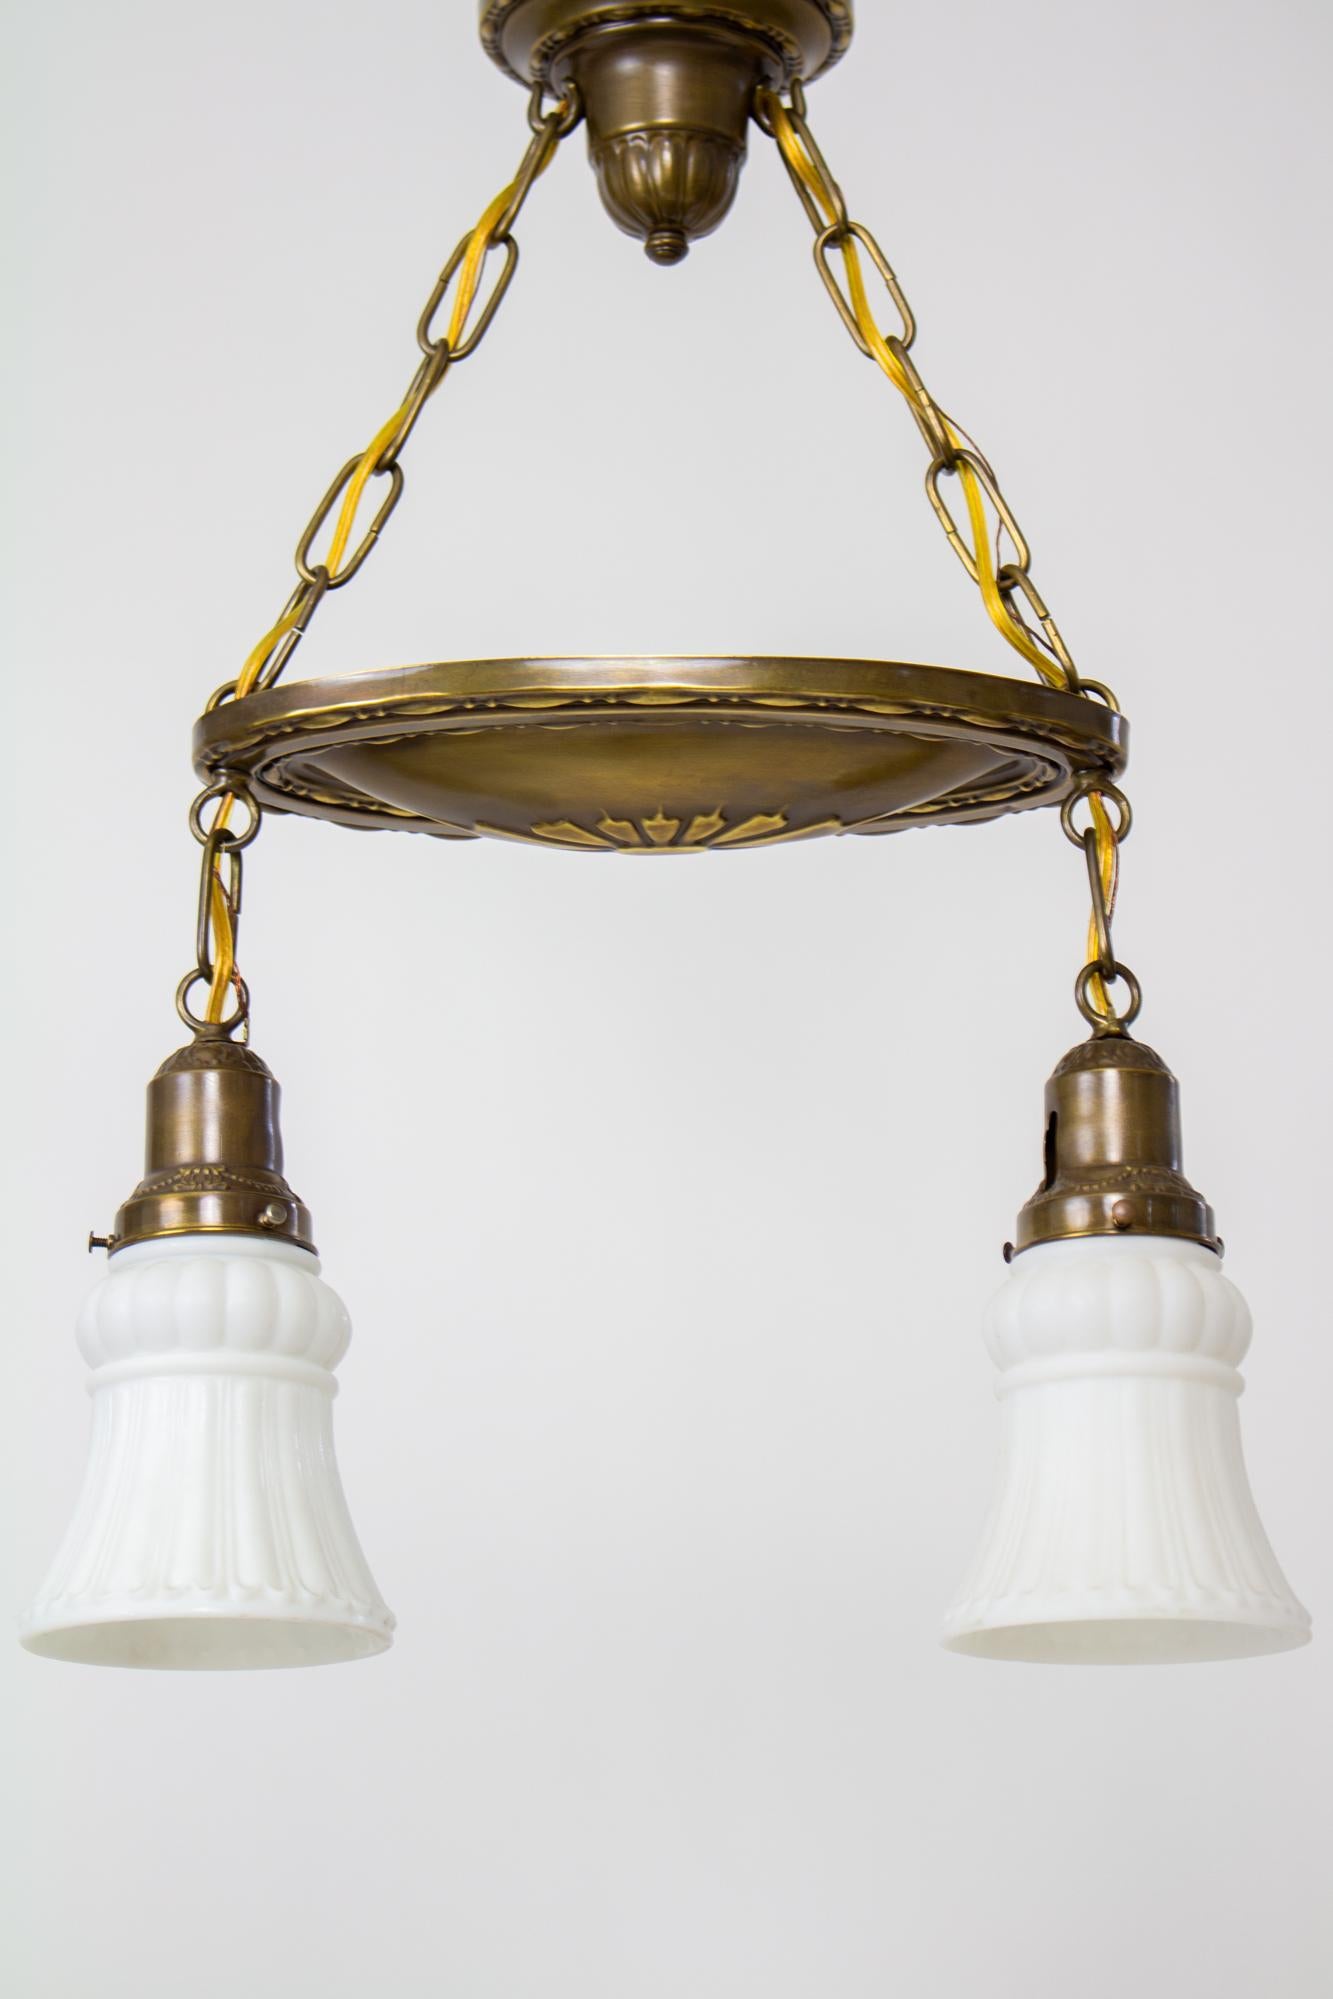 Neoclassical Revival Two Light Pan Fixture For Sale